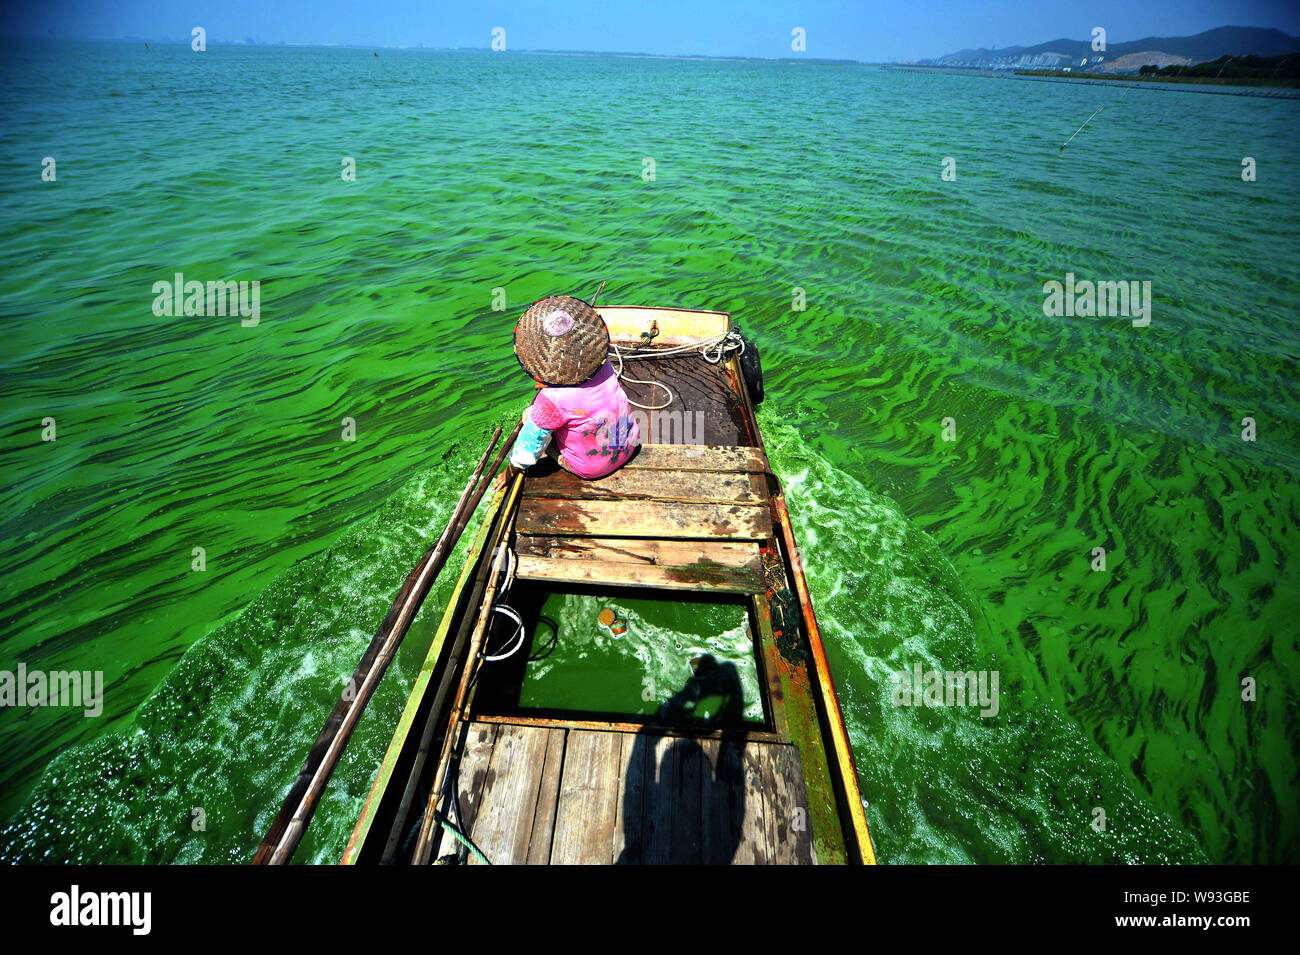 A Chinese worker rests on a boat in the green water of Taihu Lake covered by blue-green algae in Changzhou city, east Chinas Jiangsu province, 17 Augu Stock Photo